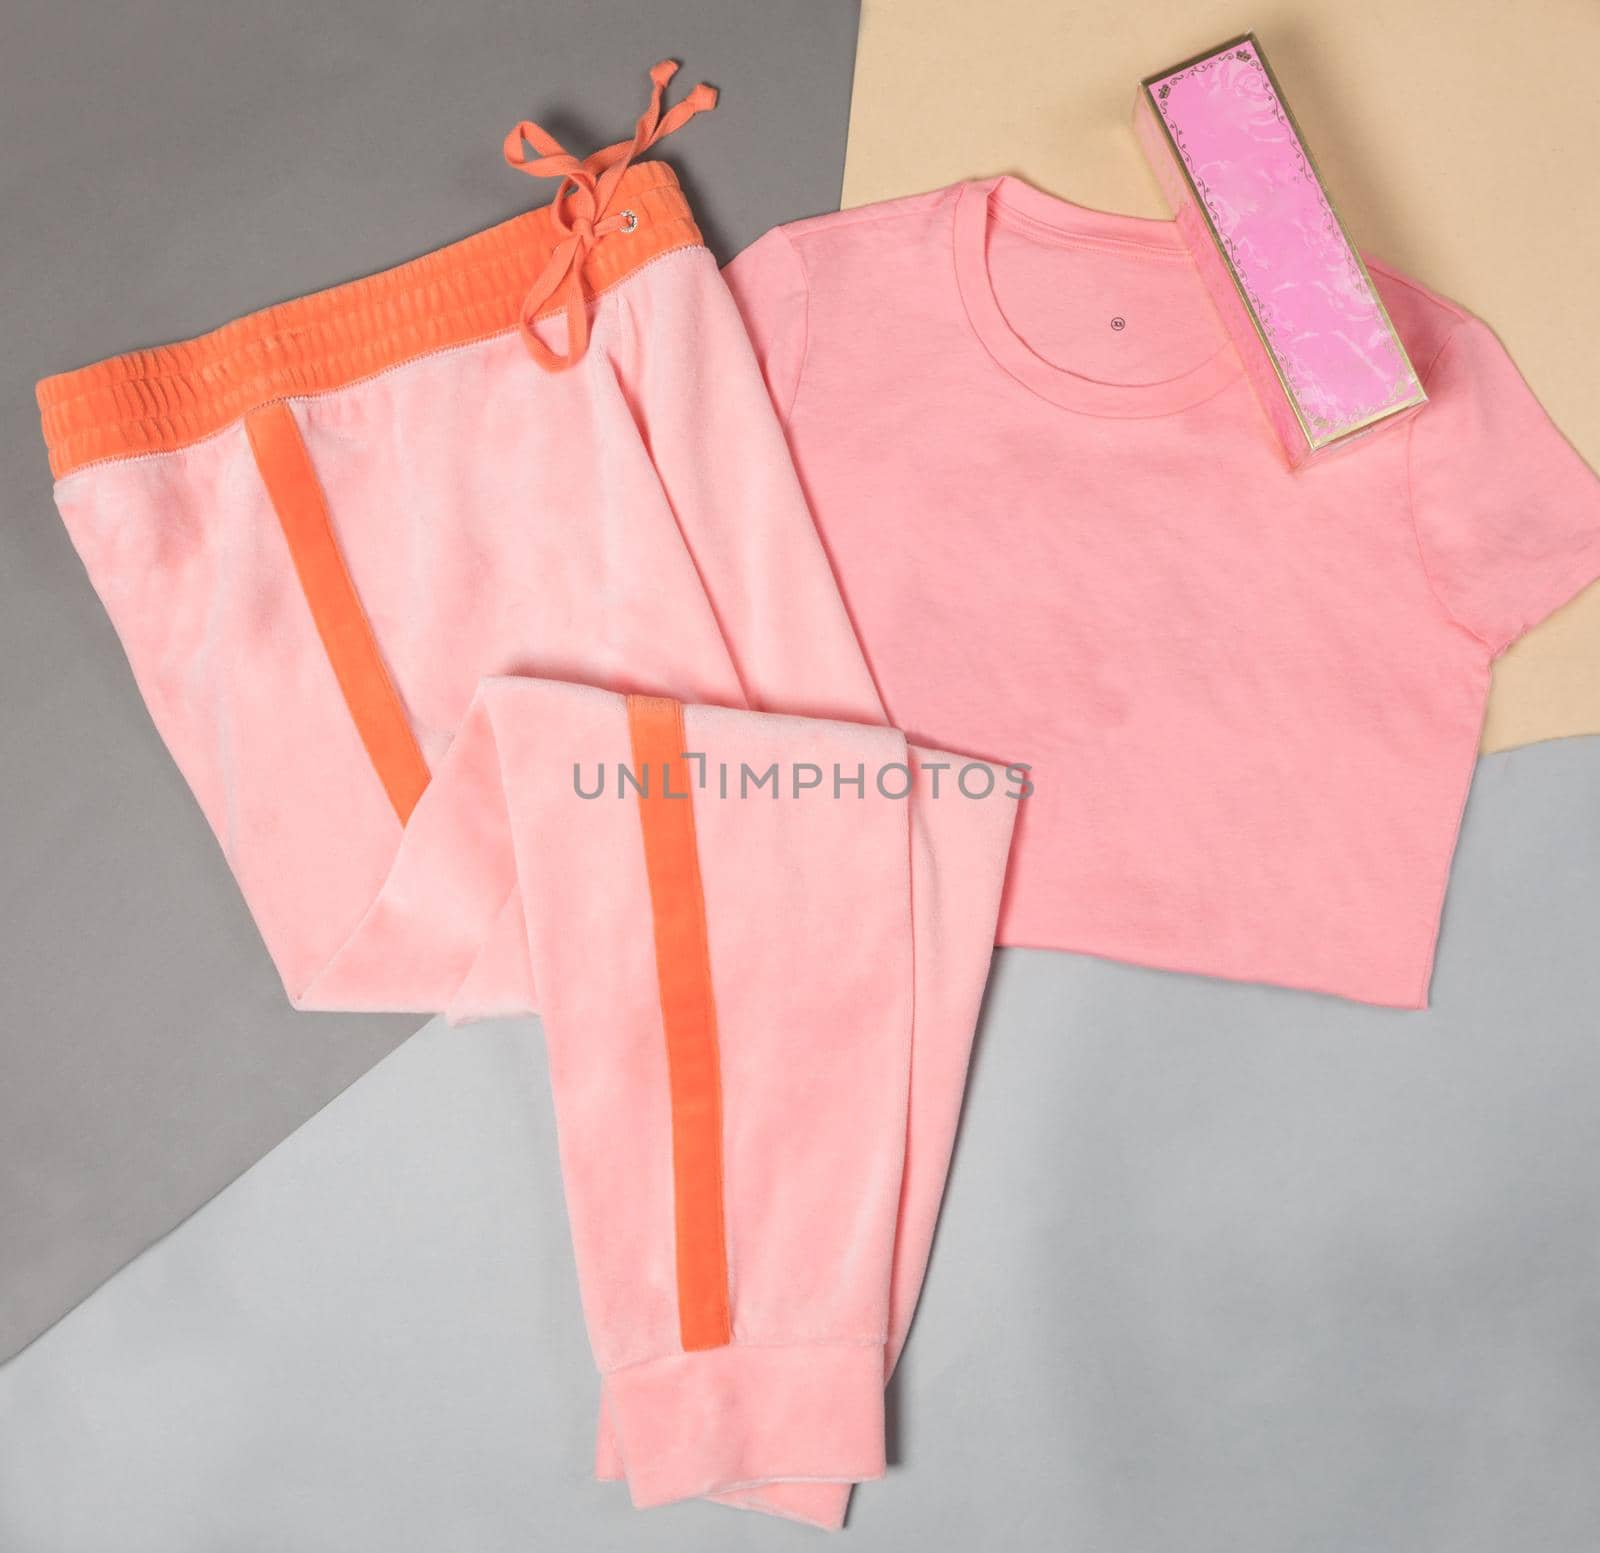 Pink color woman sport wear top view by ferhad